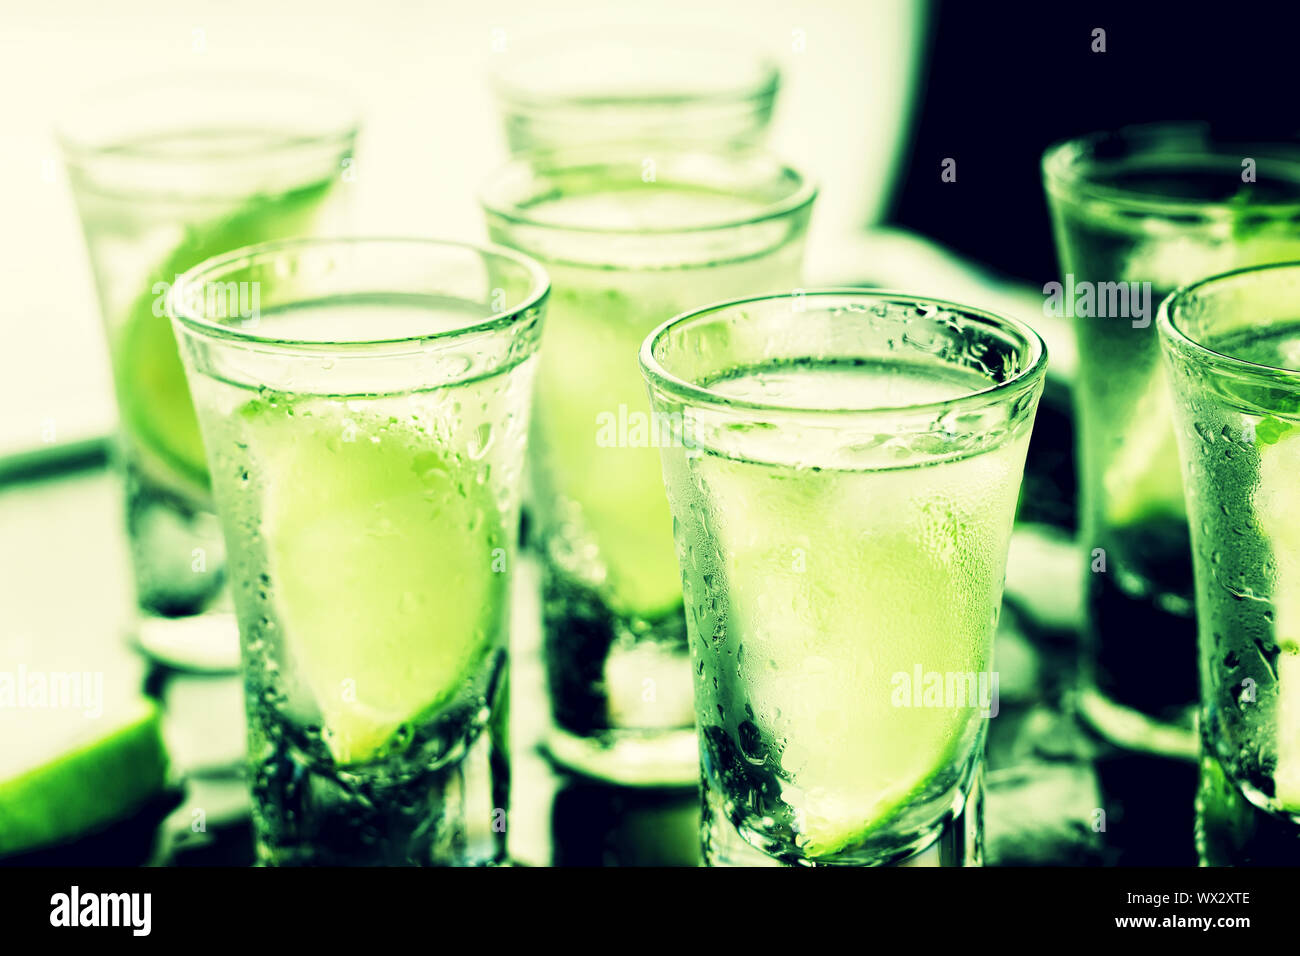 St. Patrick's Day, green, glass, alcohol, party, cocktail, bar, drink, background, Stock Photo